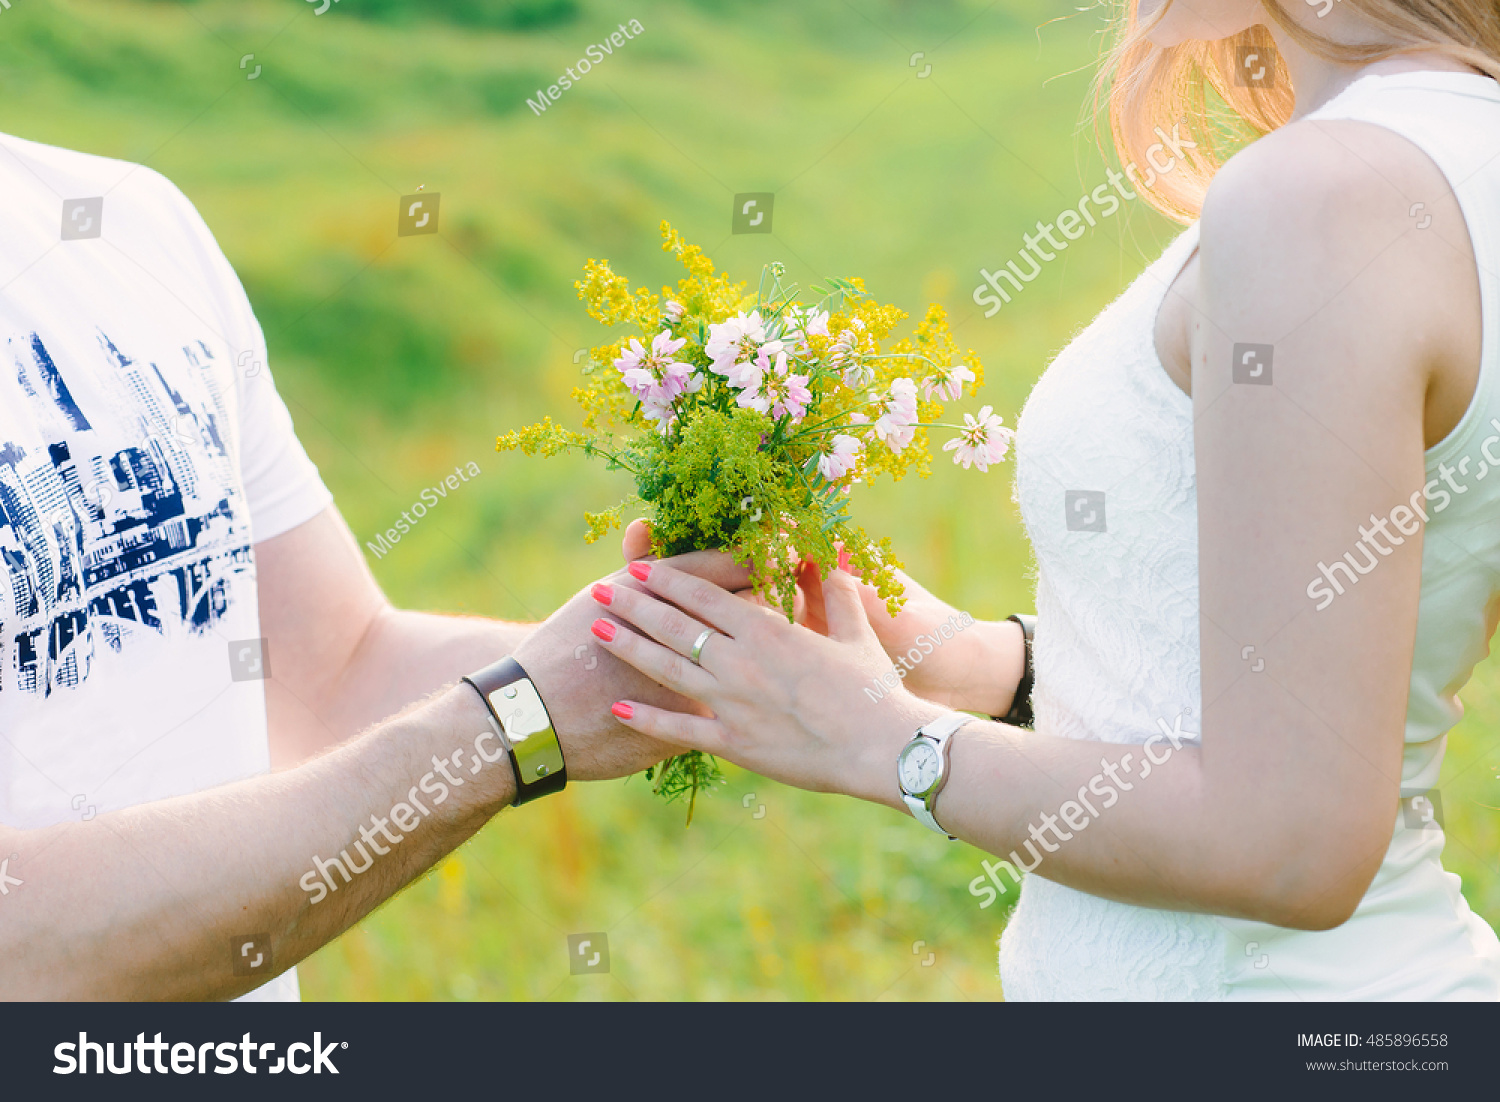 A photo of a man presenting a cute wildflowers bouquet to his girl, romantic, green background #485896558